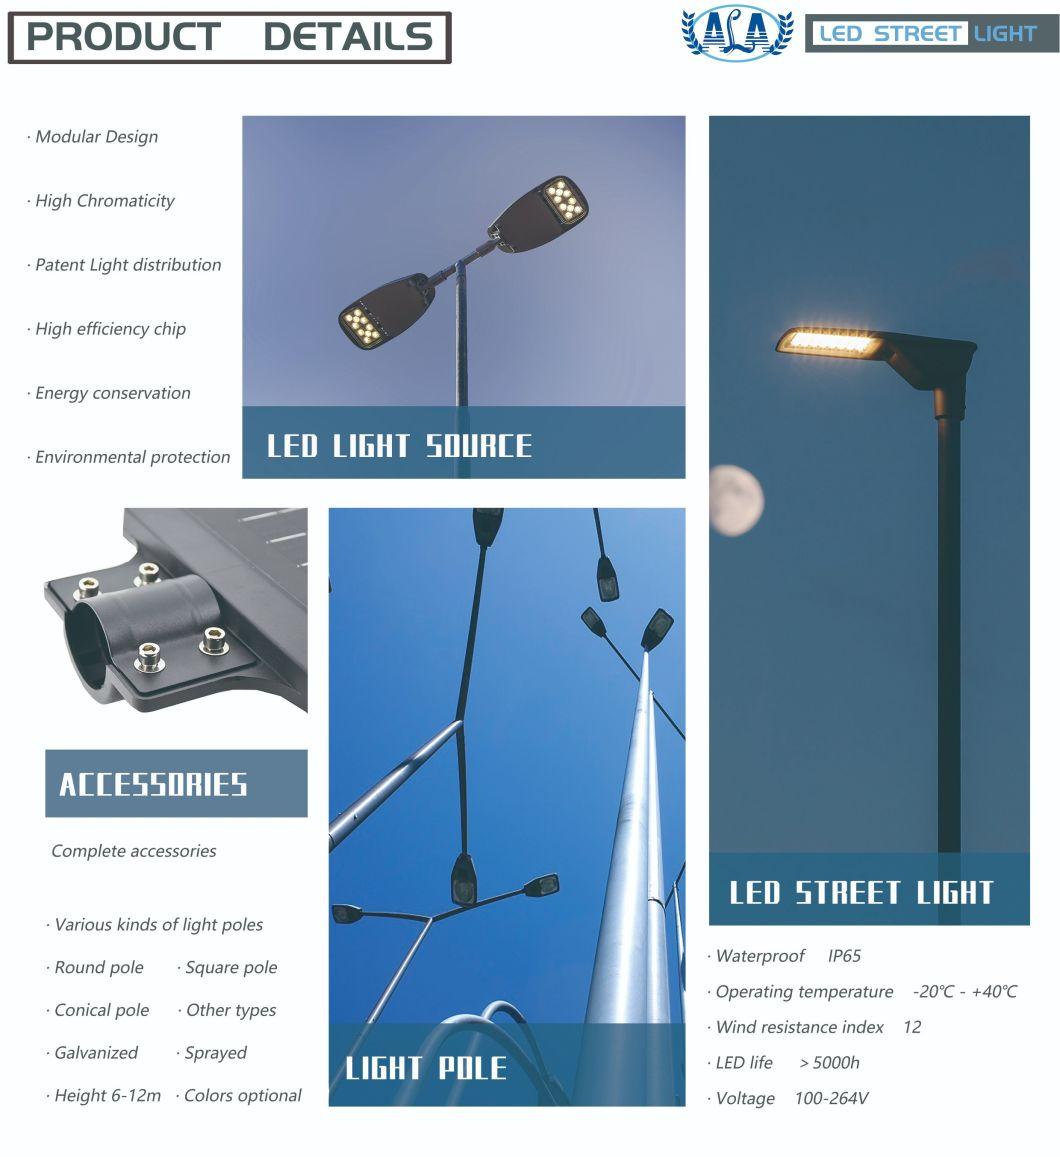 Ala 150W Integrated All in One LED Street Light